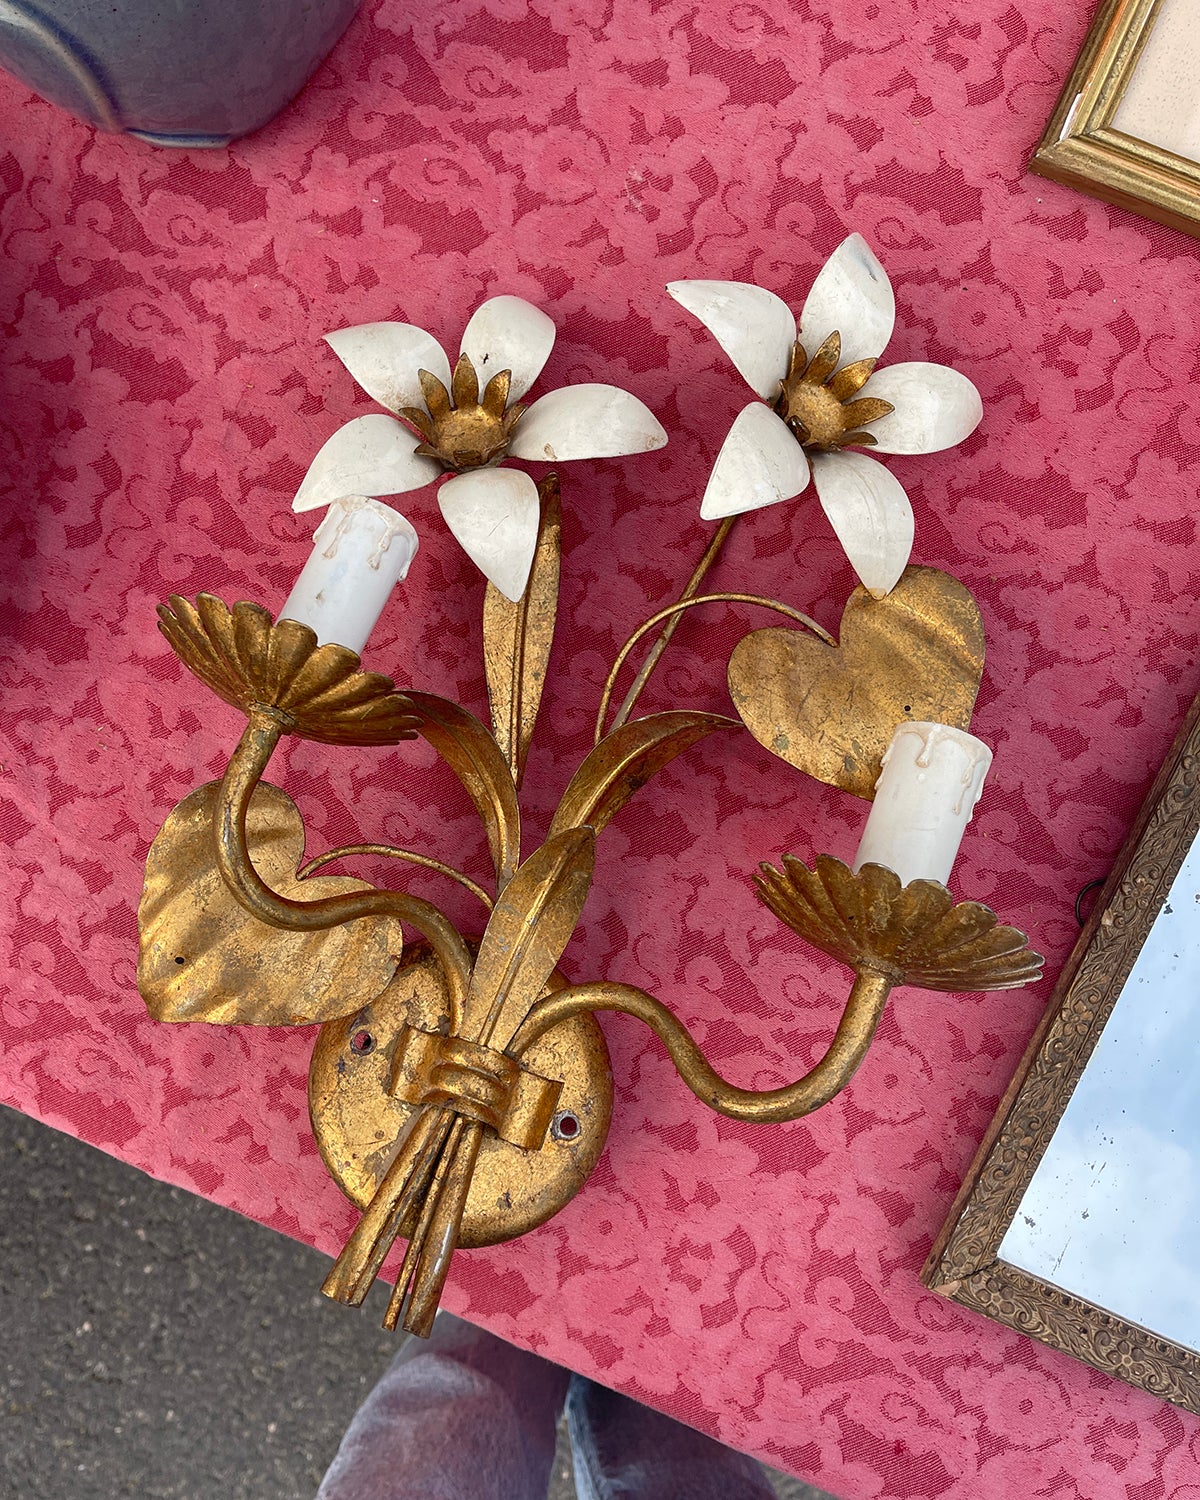 Flower sconce at French flea